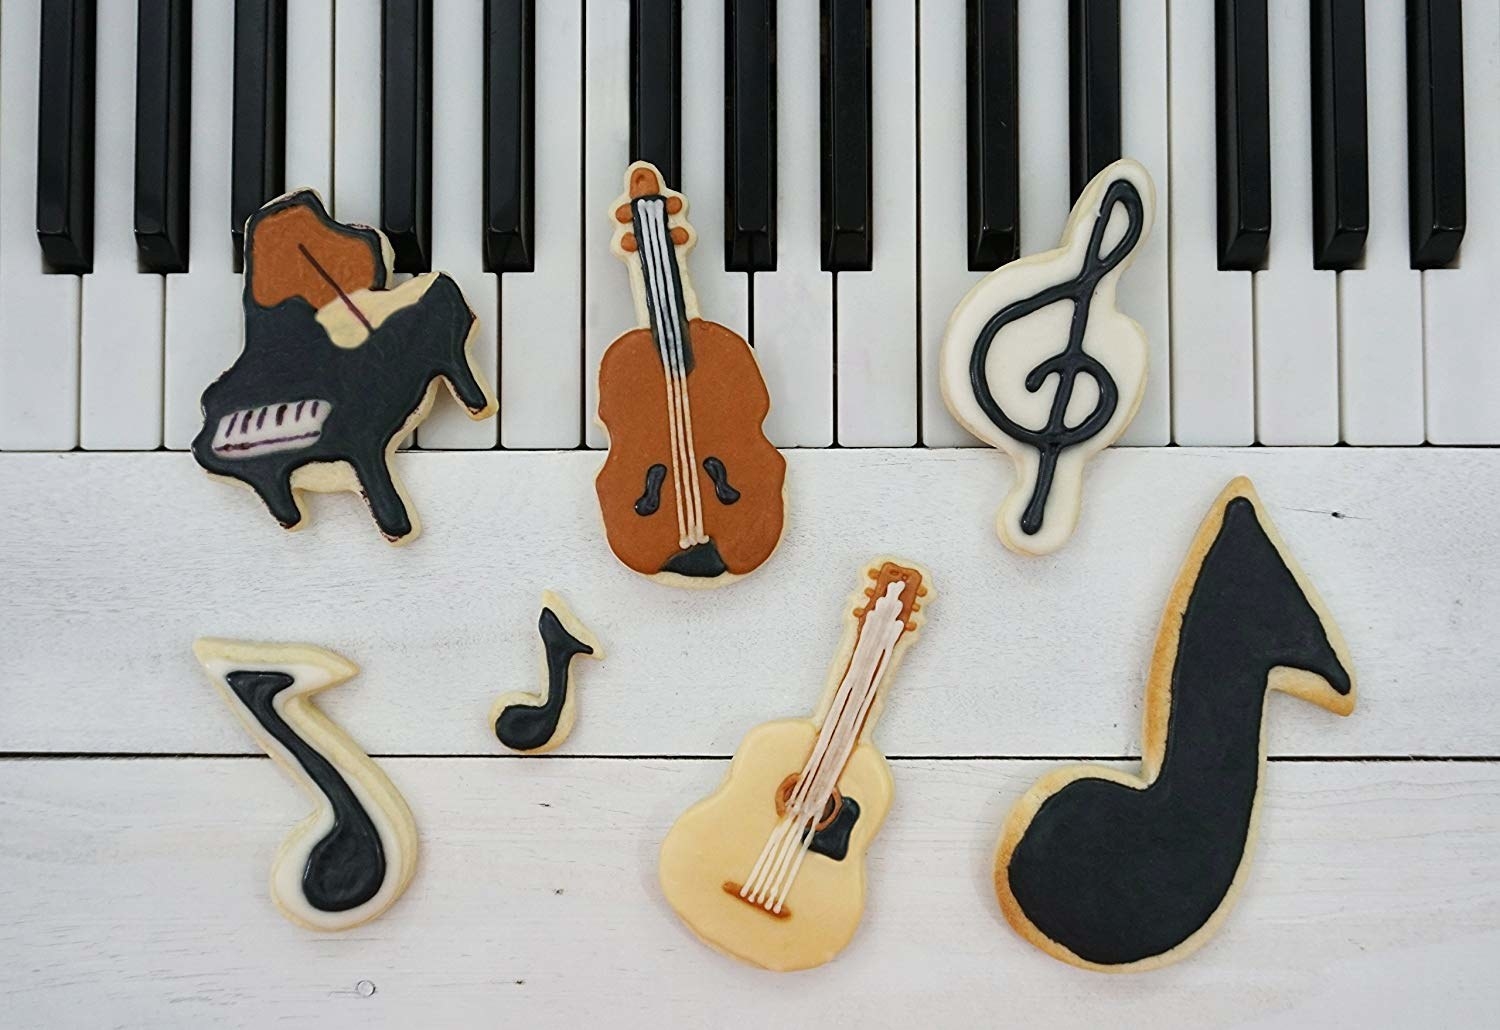 Seven cookies in the shape of music notes, guitars, and a piano